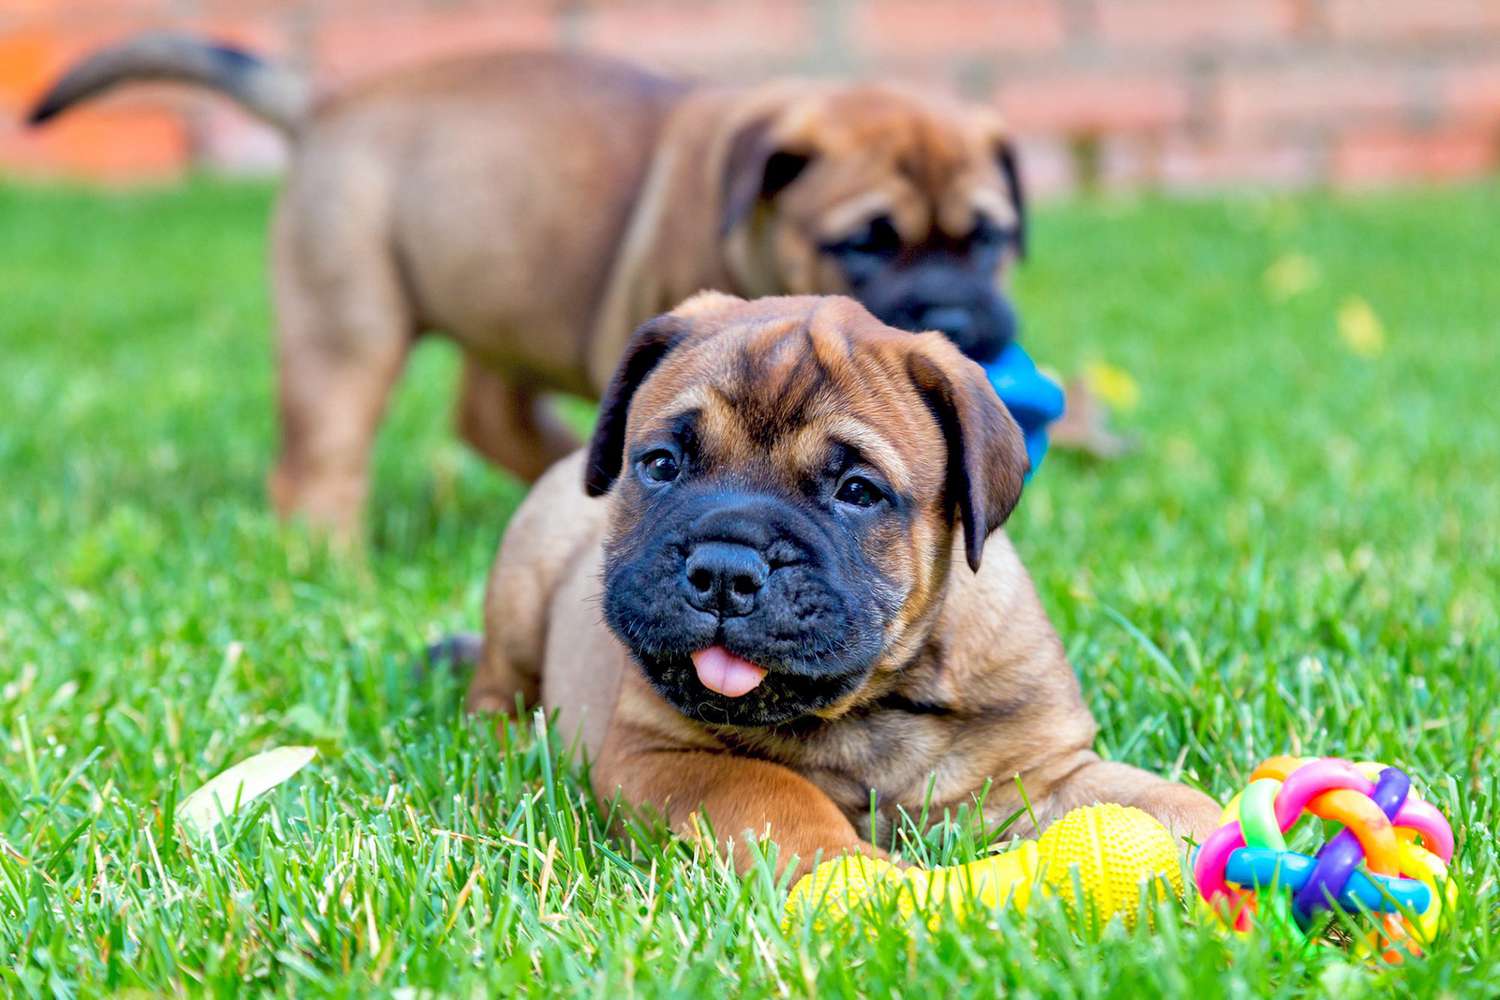 Two bullmastiff puppies play with toys in grass